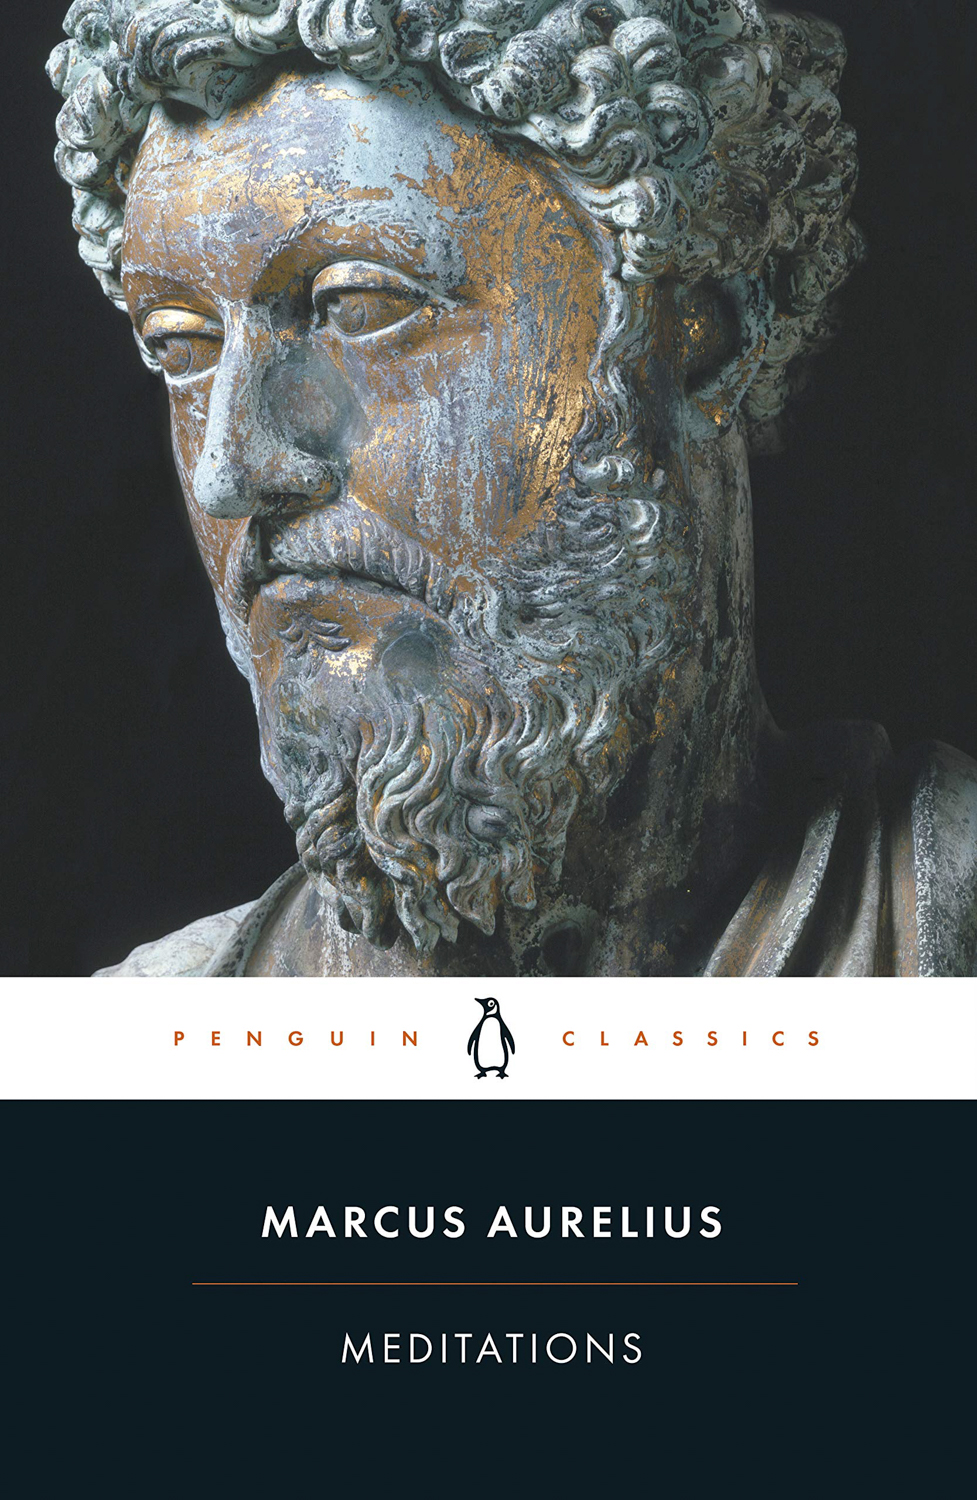 Some thoughts on copying Meditations by Marcus Aurelius.